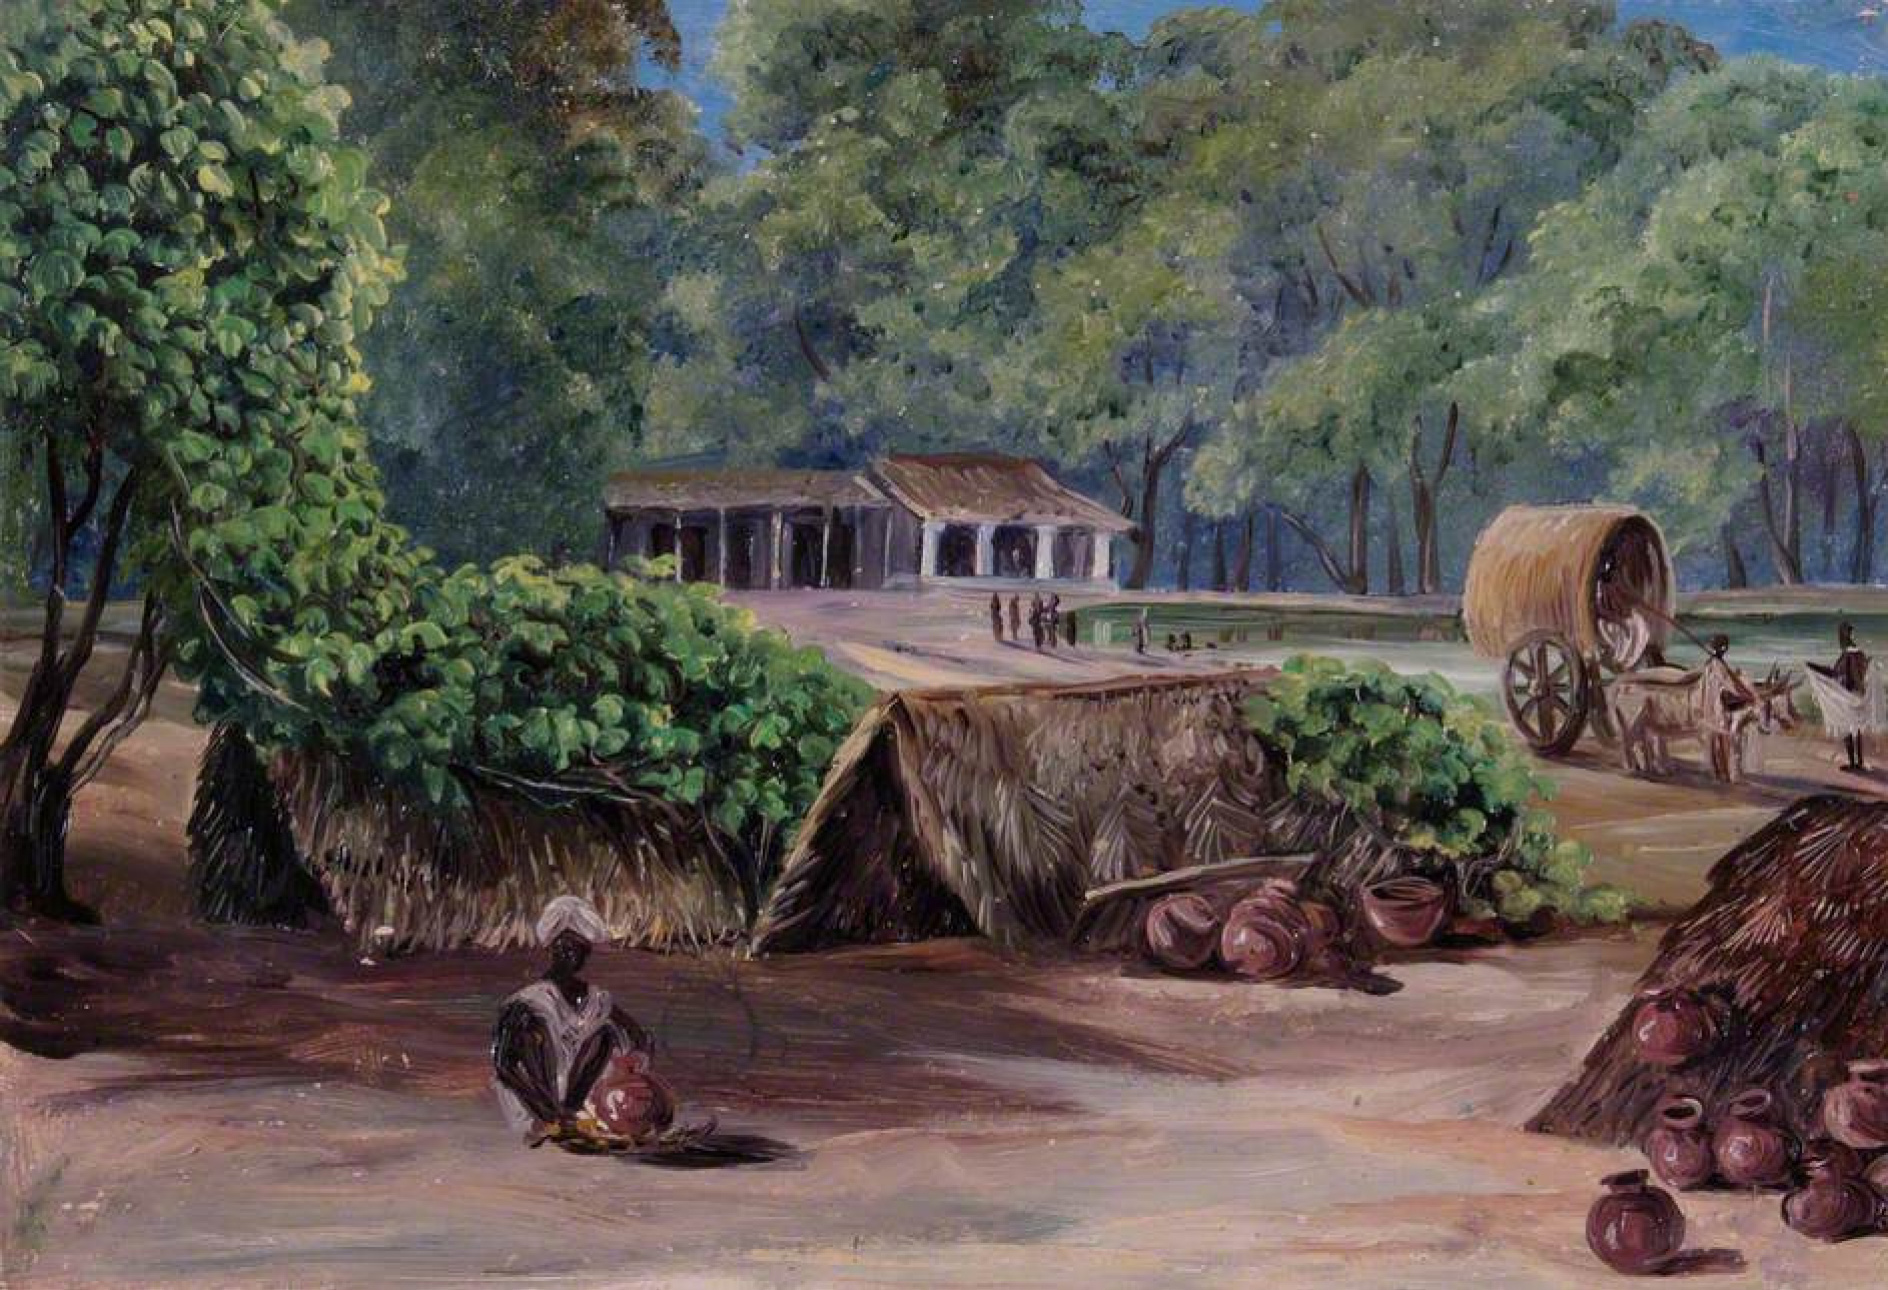 reflect Mountaineer Grand Aboriginal Huts in Tempura, India, 1881, 25×18 cm by Marianna North:  History, Analysis & Facts | Arthive